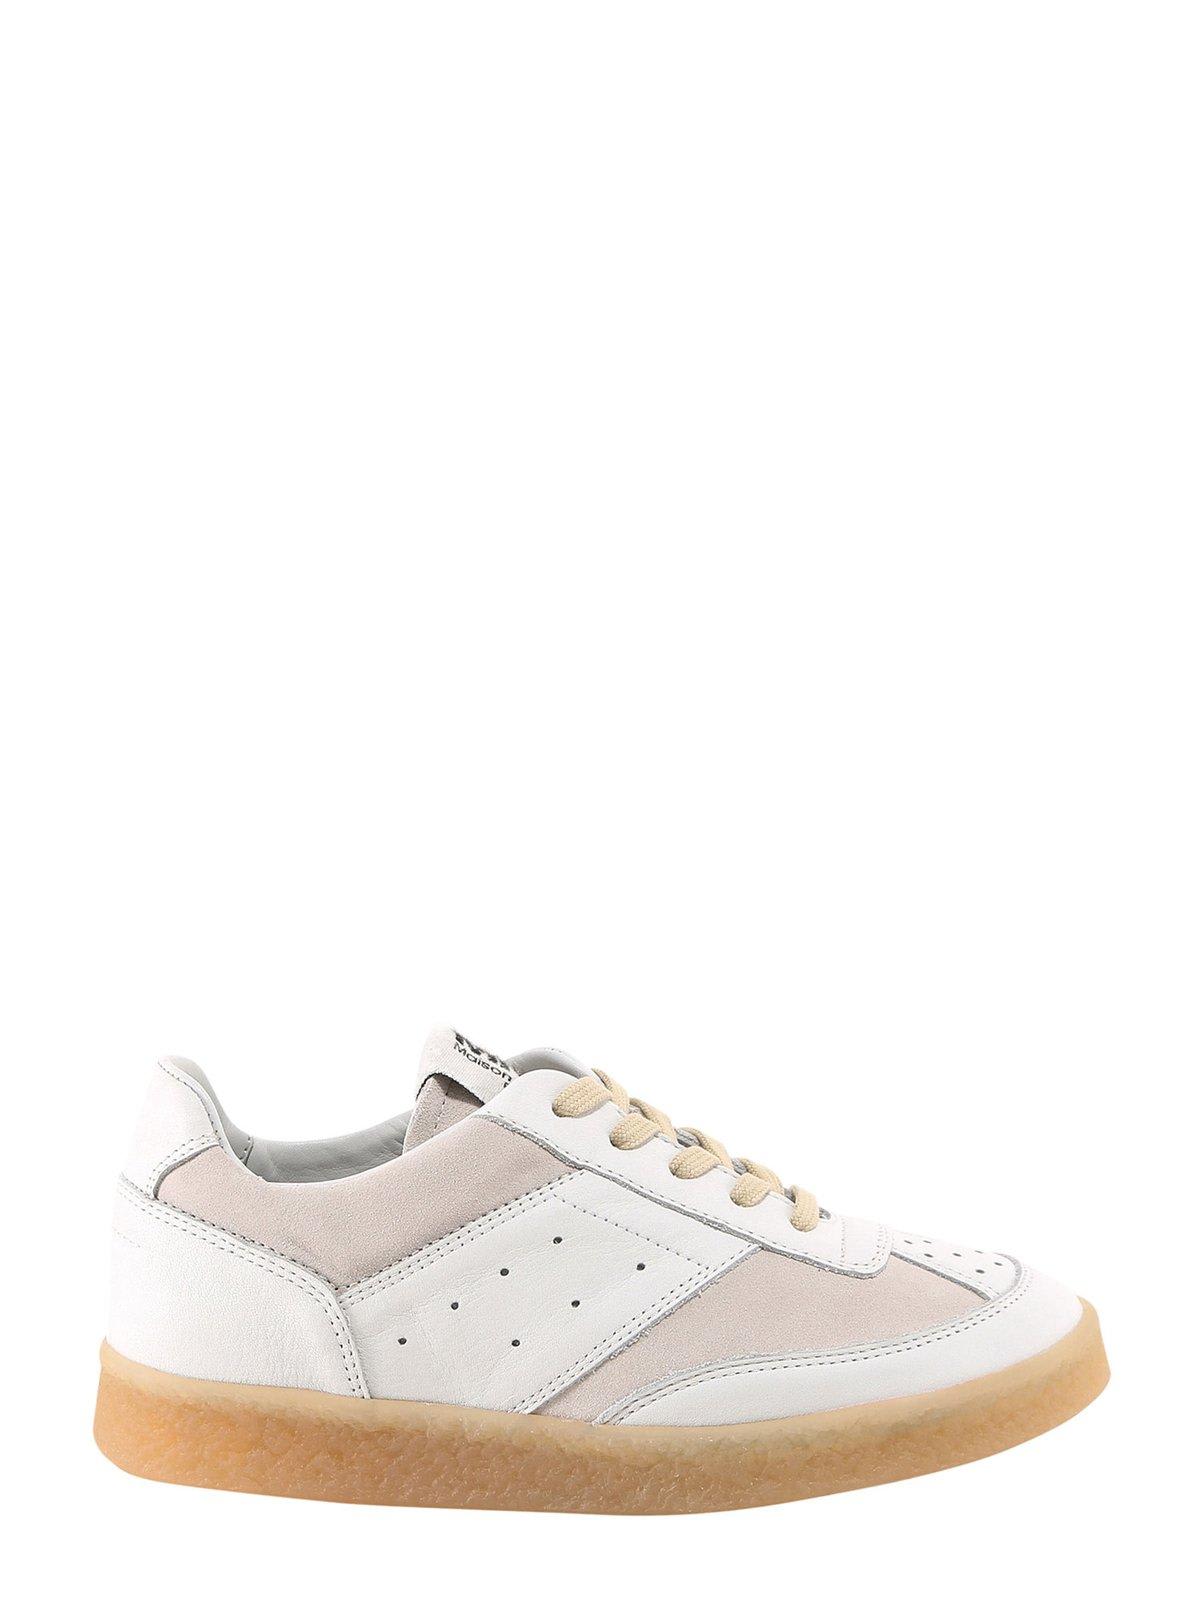 Maison Margiela Lace-up Sneakers In White